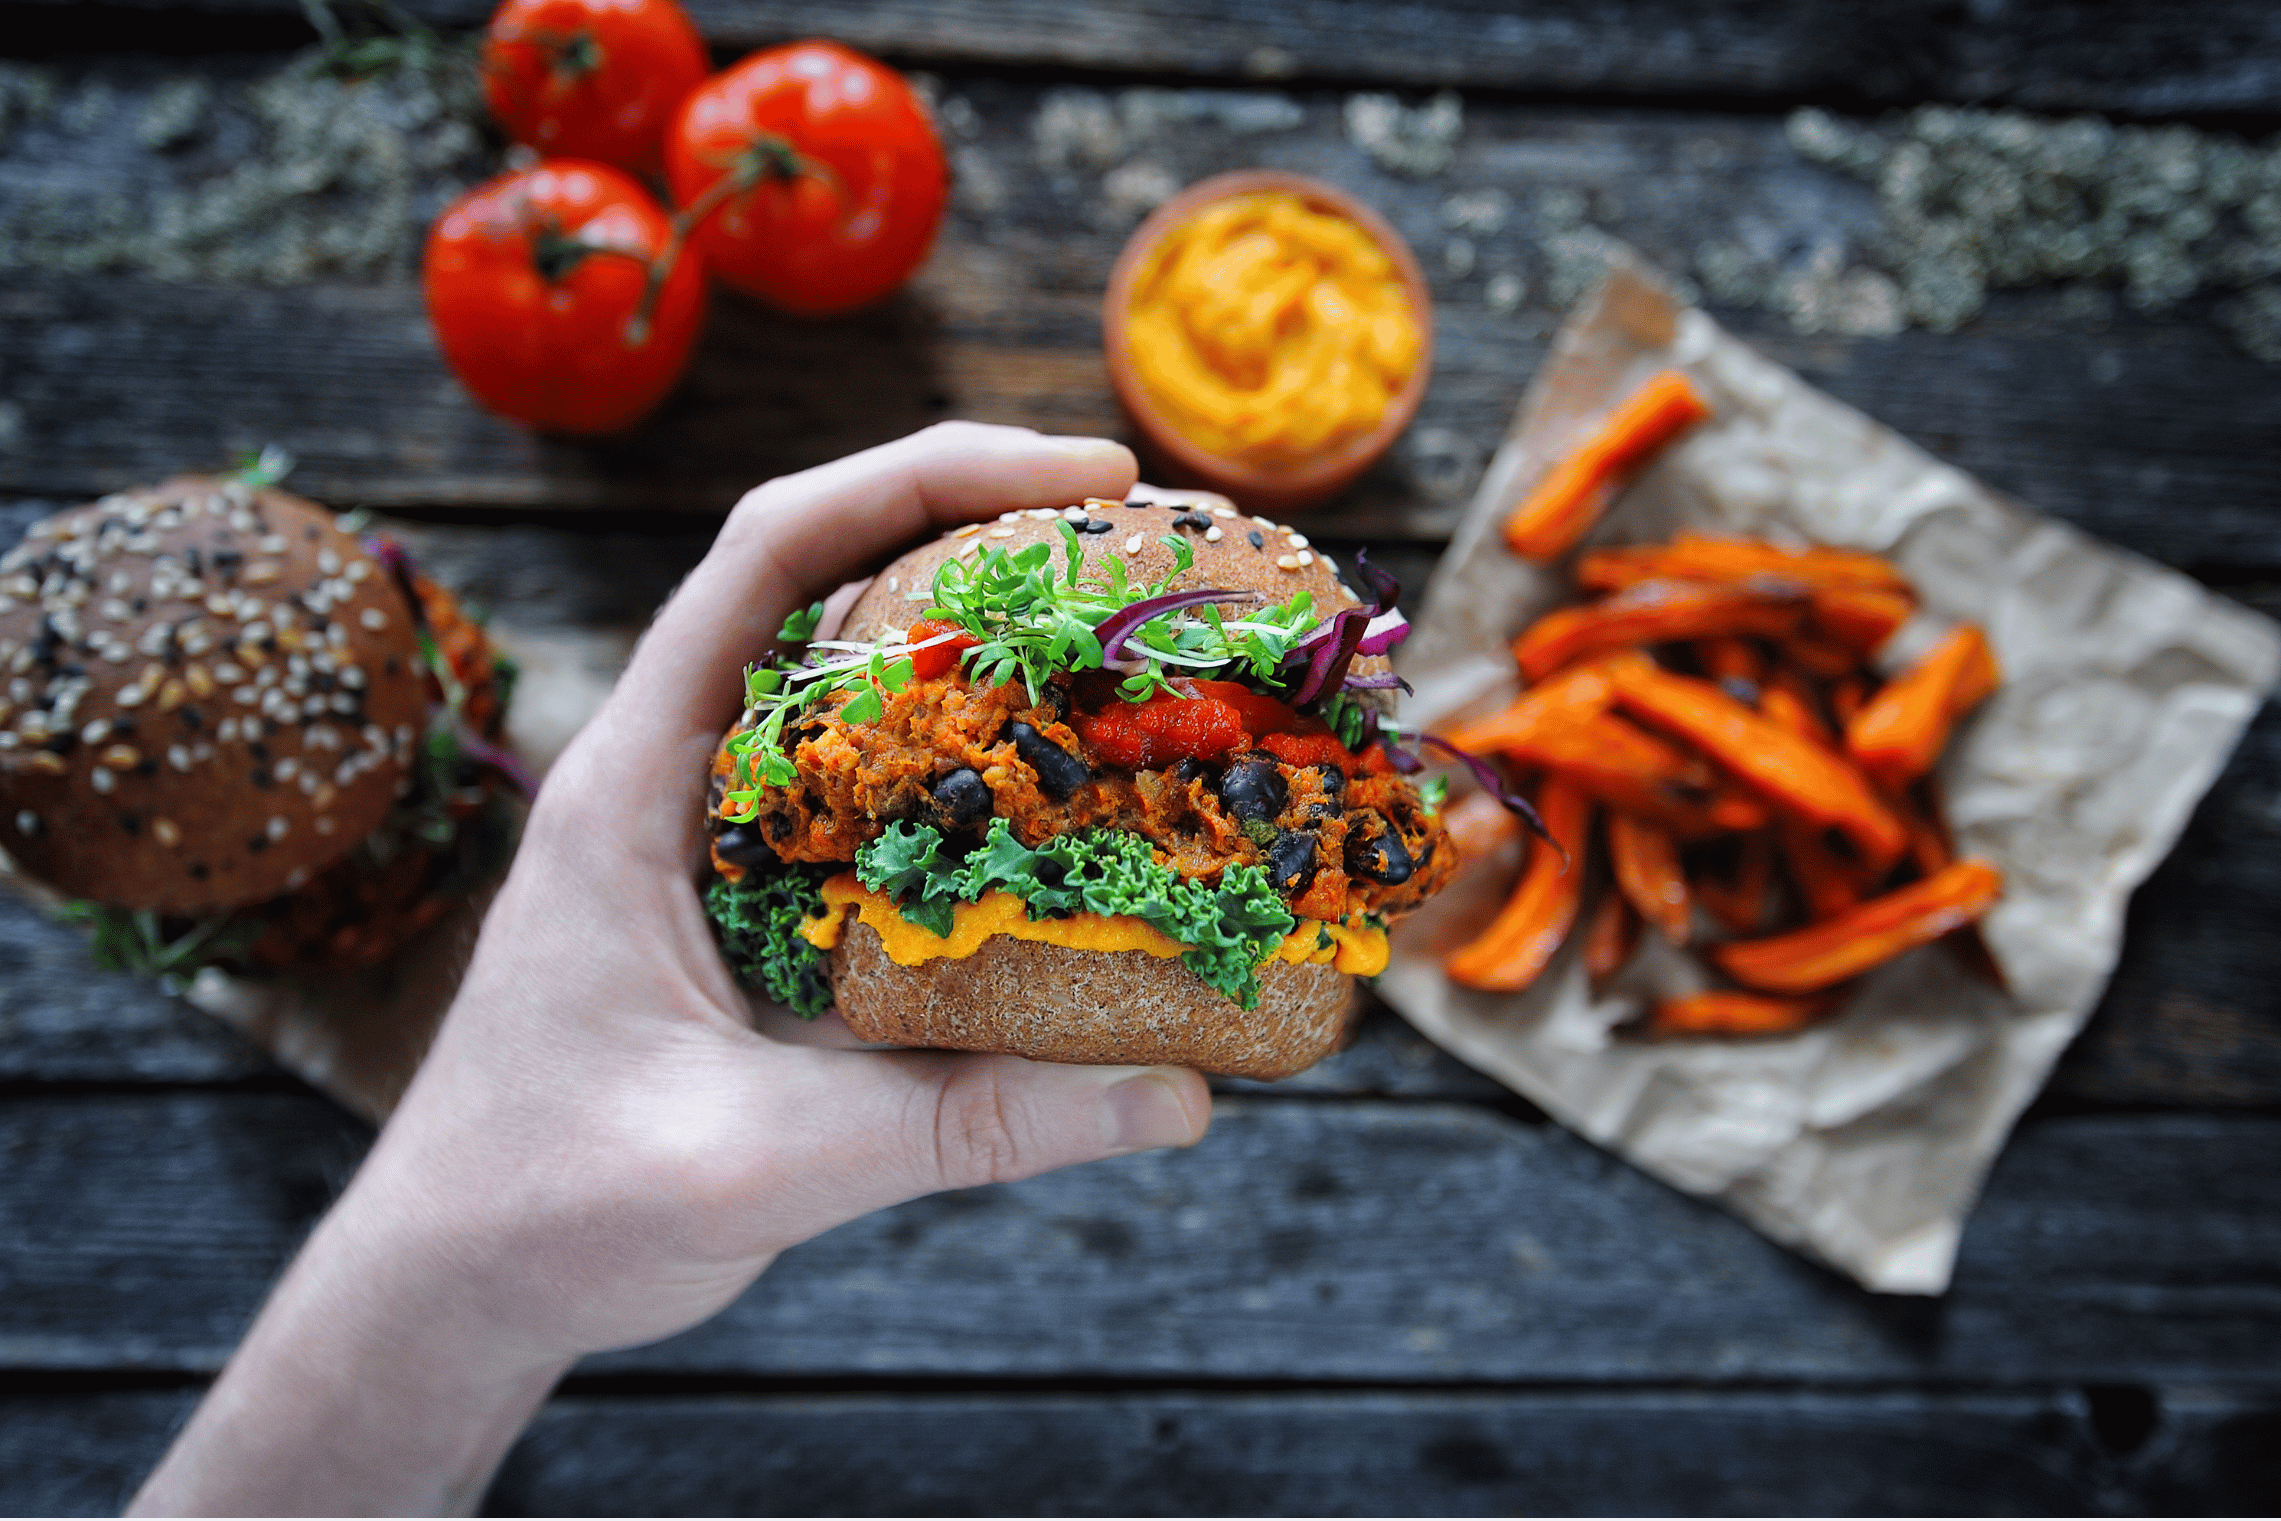 An image of a plant based burger